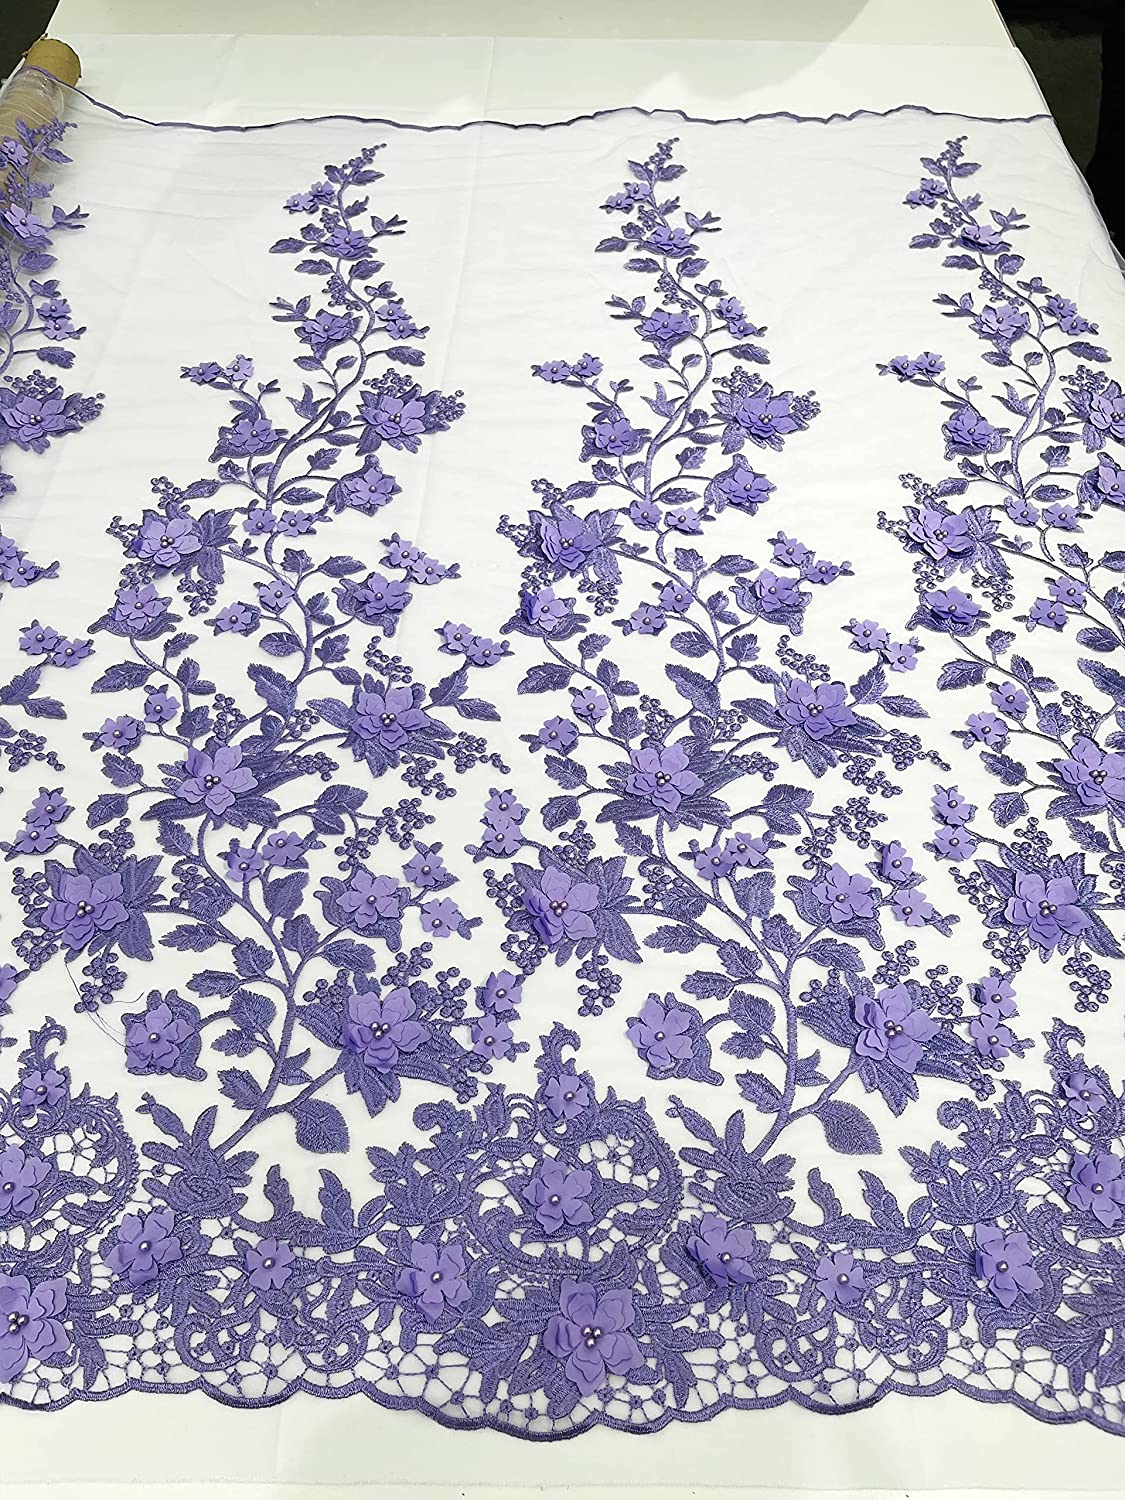 Emily 3-D Floral Design Embroider with Pearls On A Mesh Lace Fabric (1 Yard, Lavender)